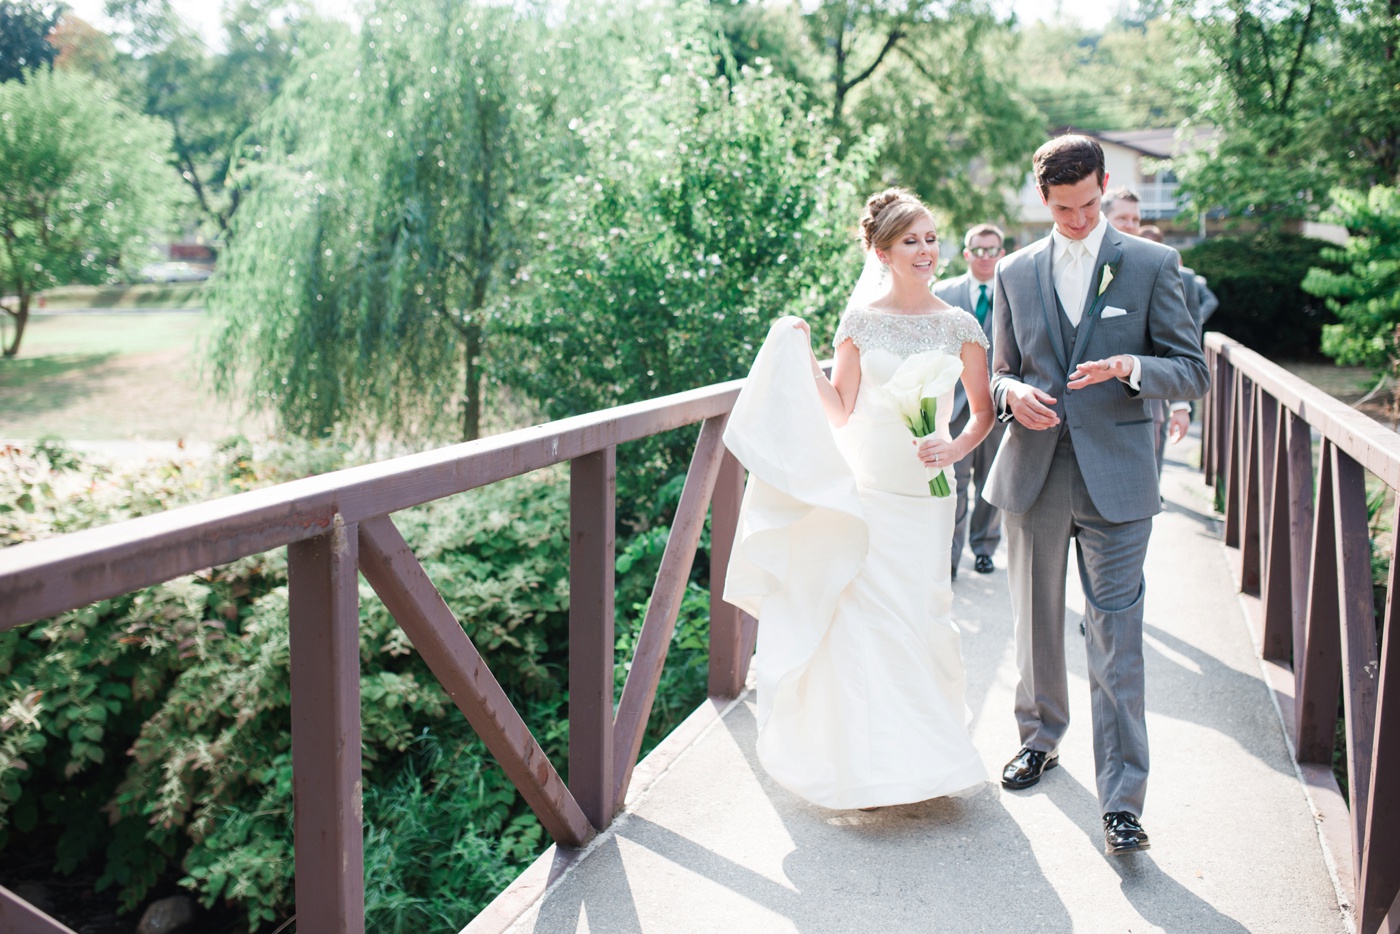 50 - Leslie + Eric - Paterson New Jersey Wedding Photographer - Alison Dunn Photography photo